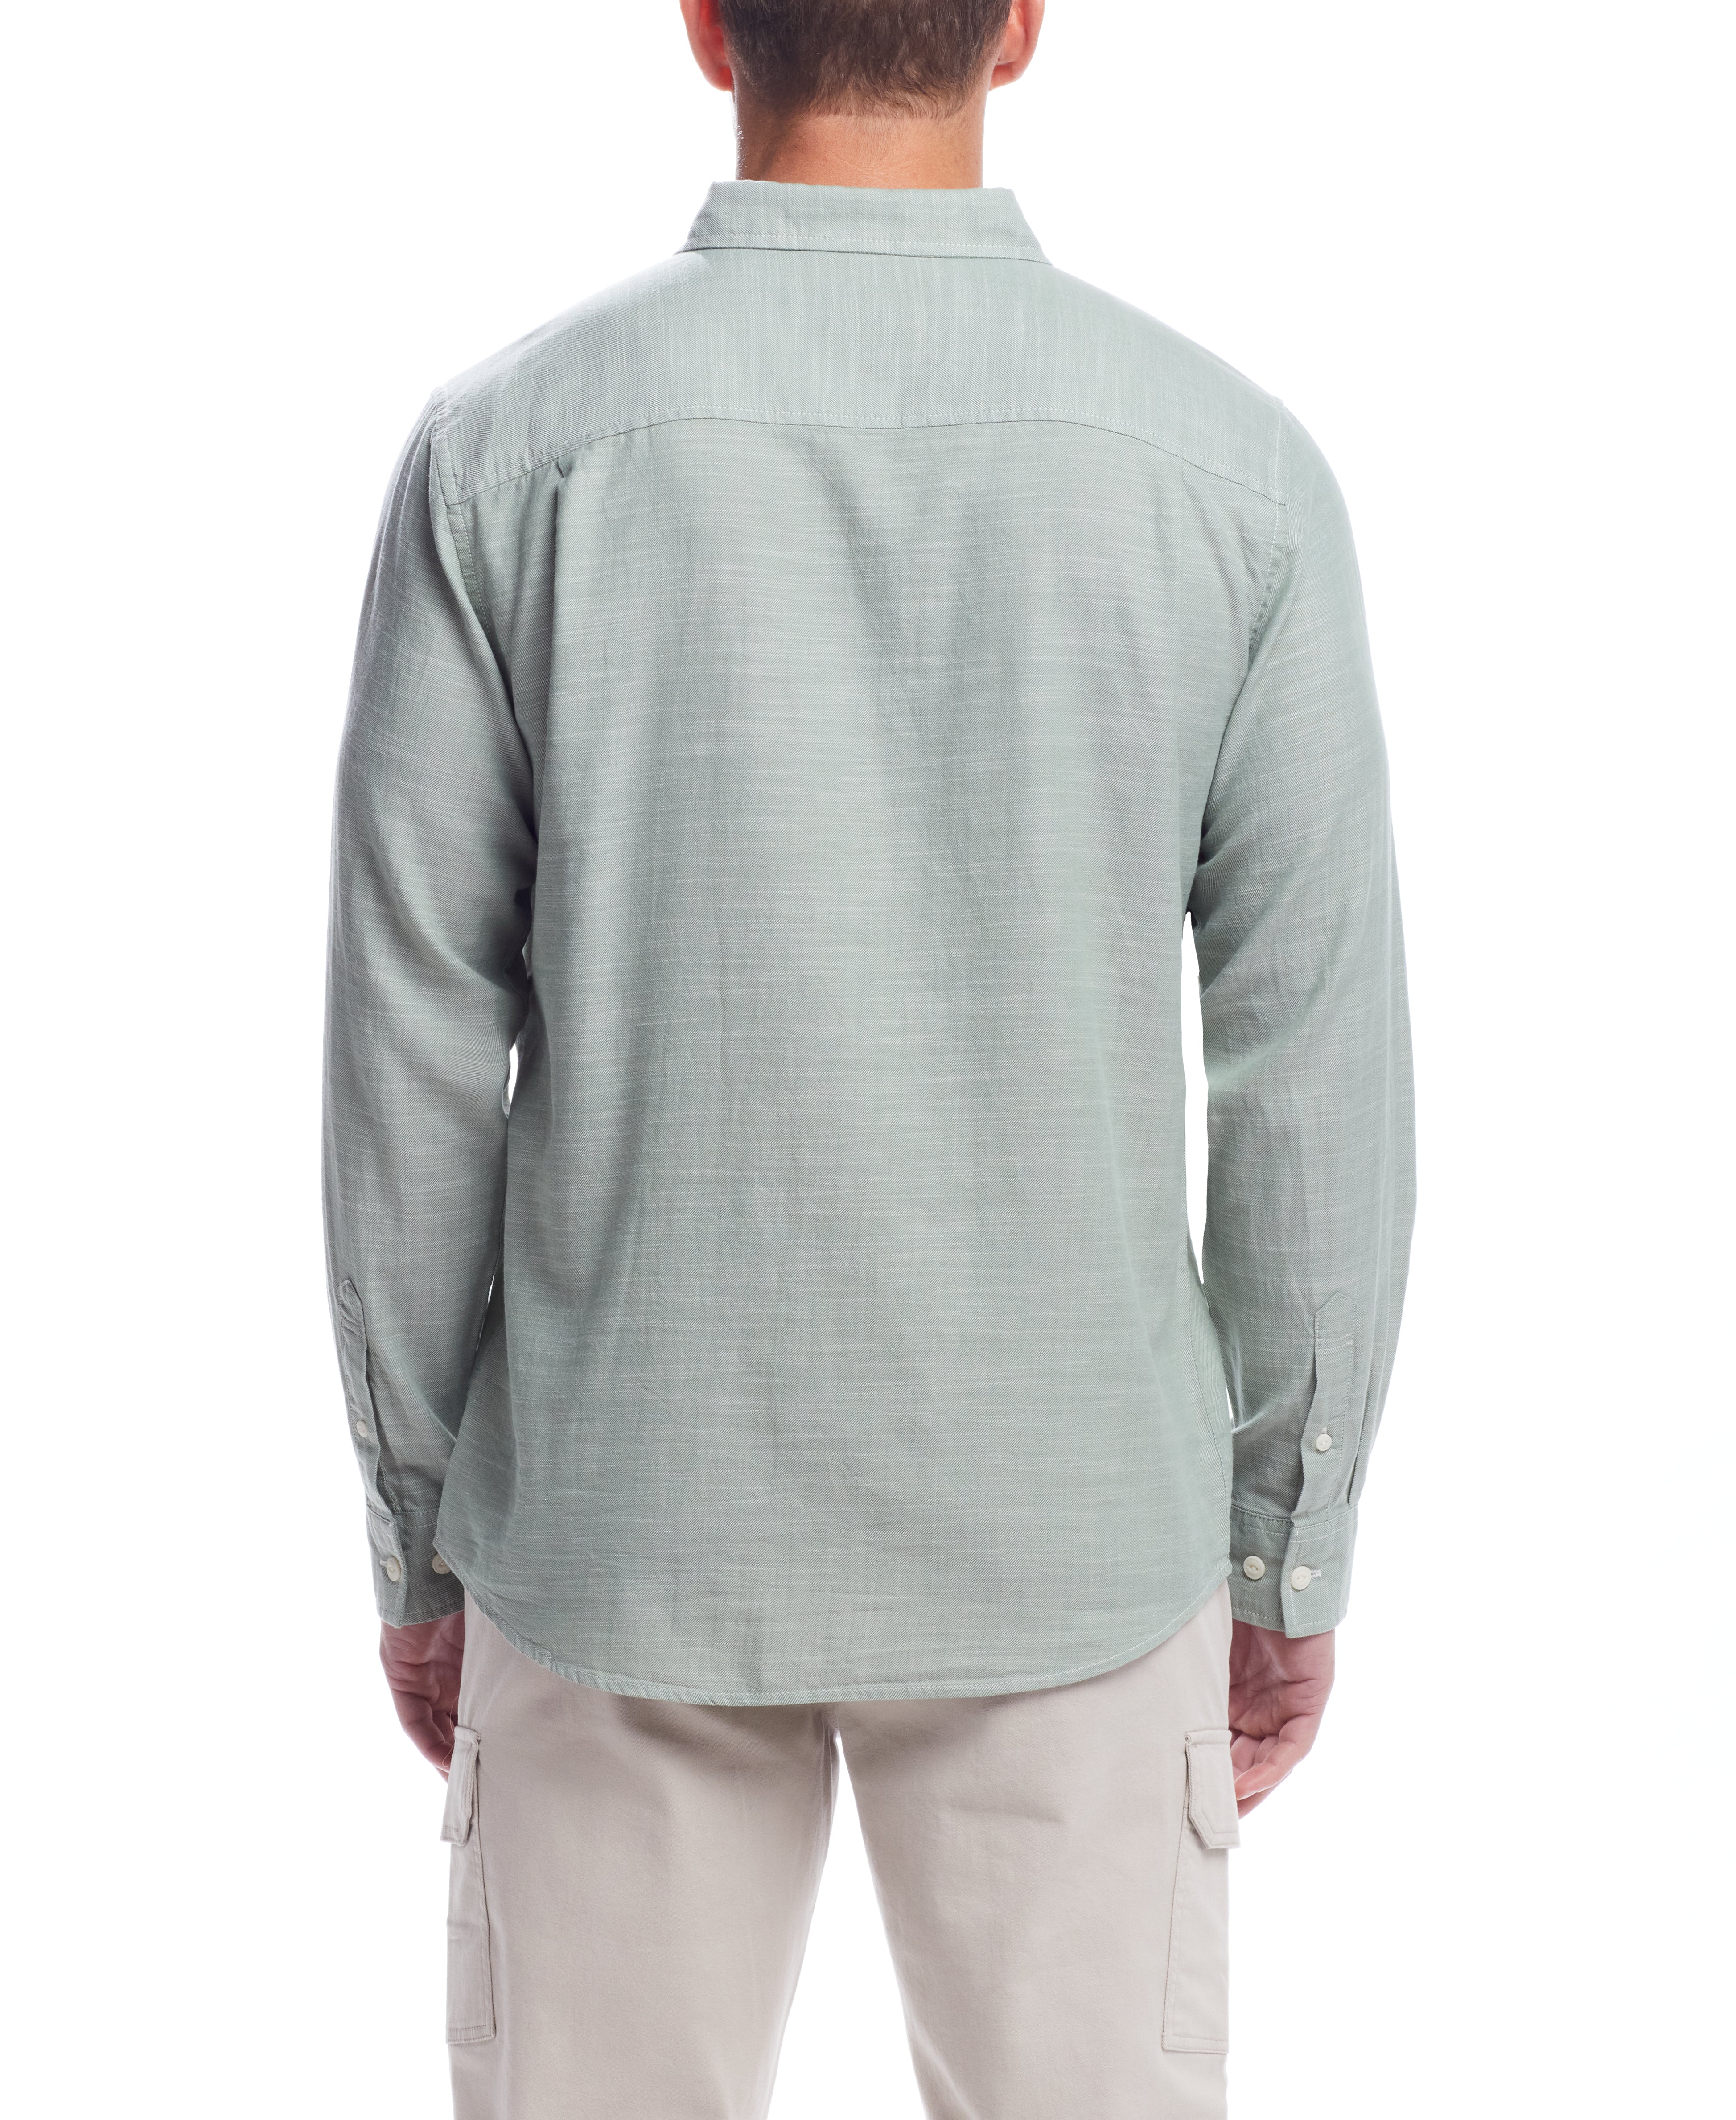 Long Sleeve Solid Cotton Twill Shirt In Hedge Green